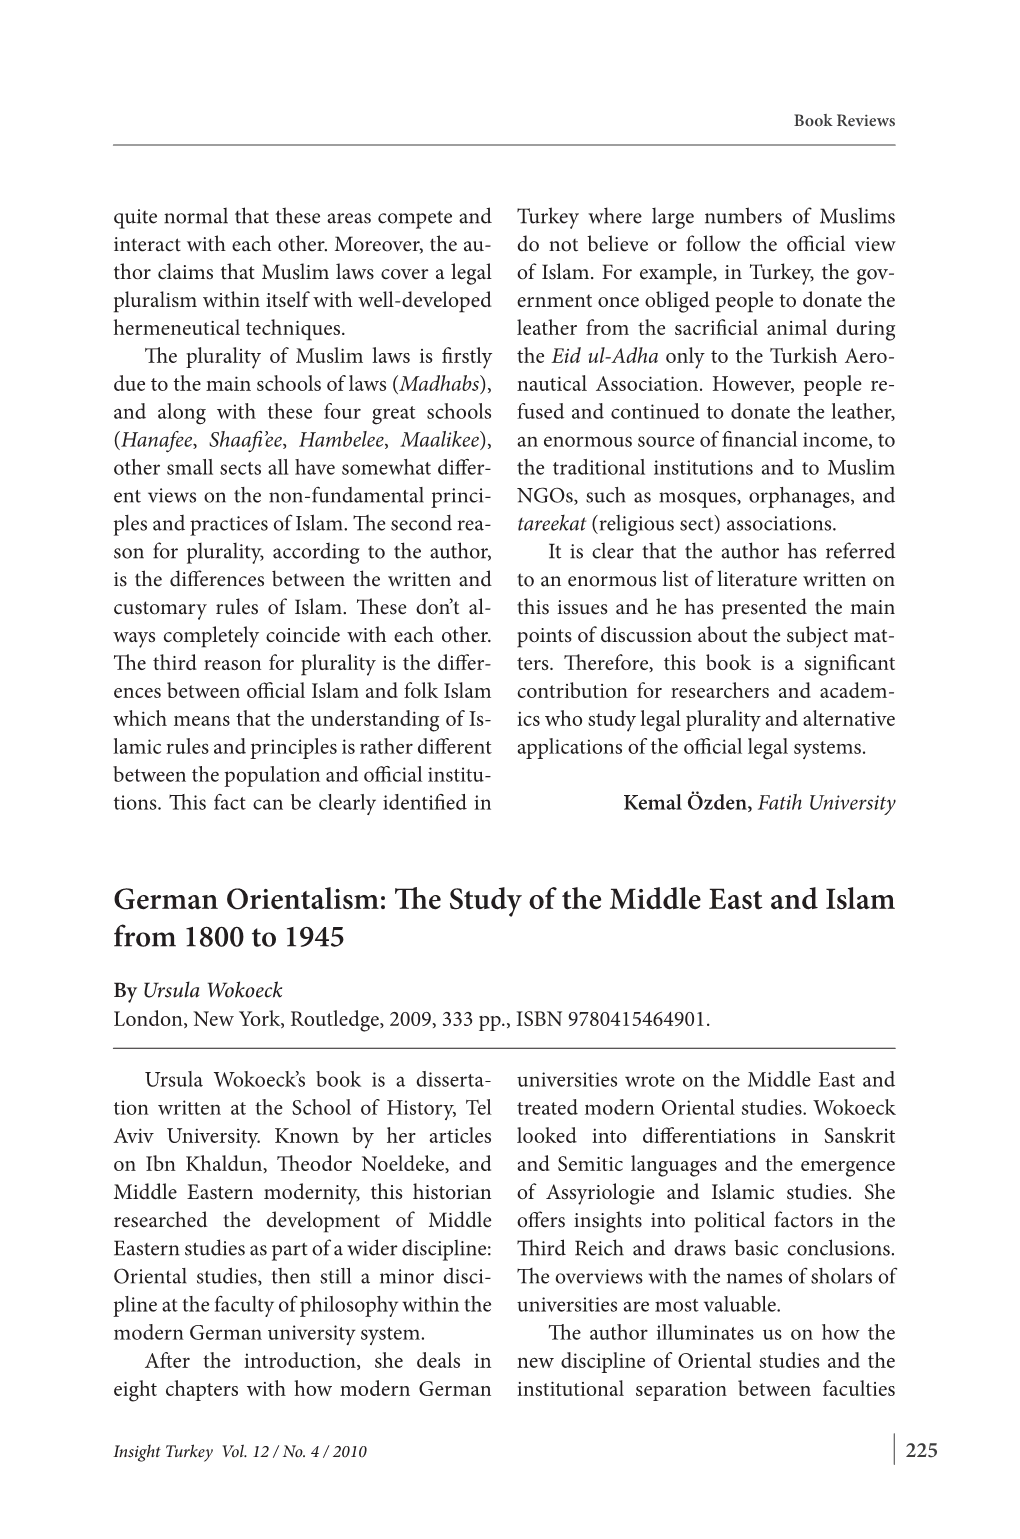 German Orientalism: the Study of the Middle East and Islam from 1800 to 1945